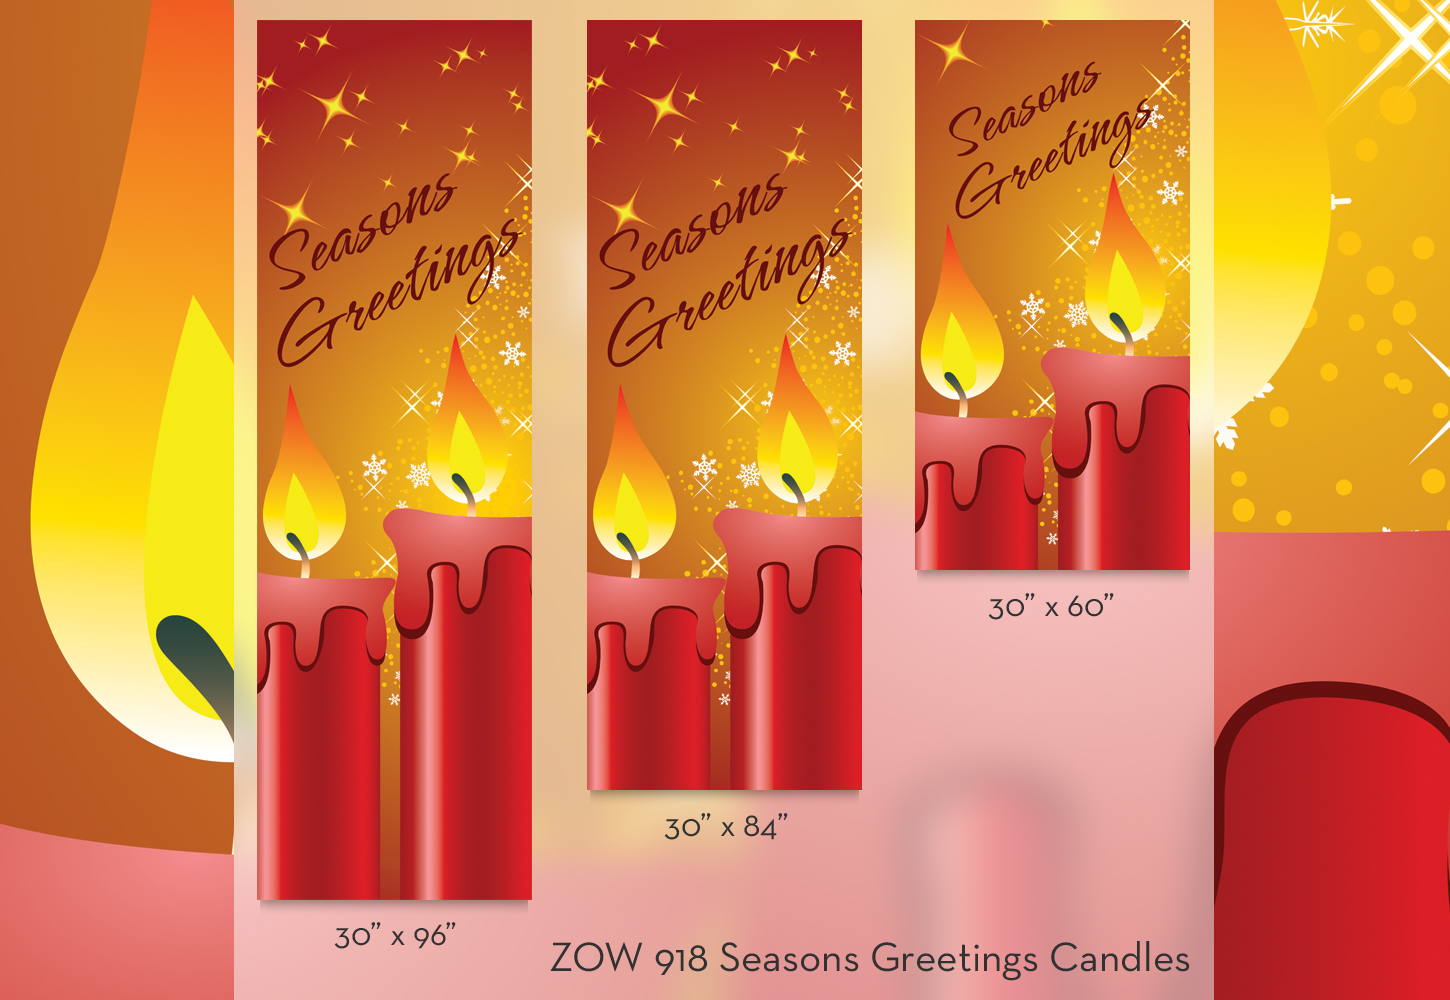 ZOW 918 Seasons Greetings Candles